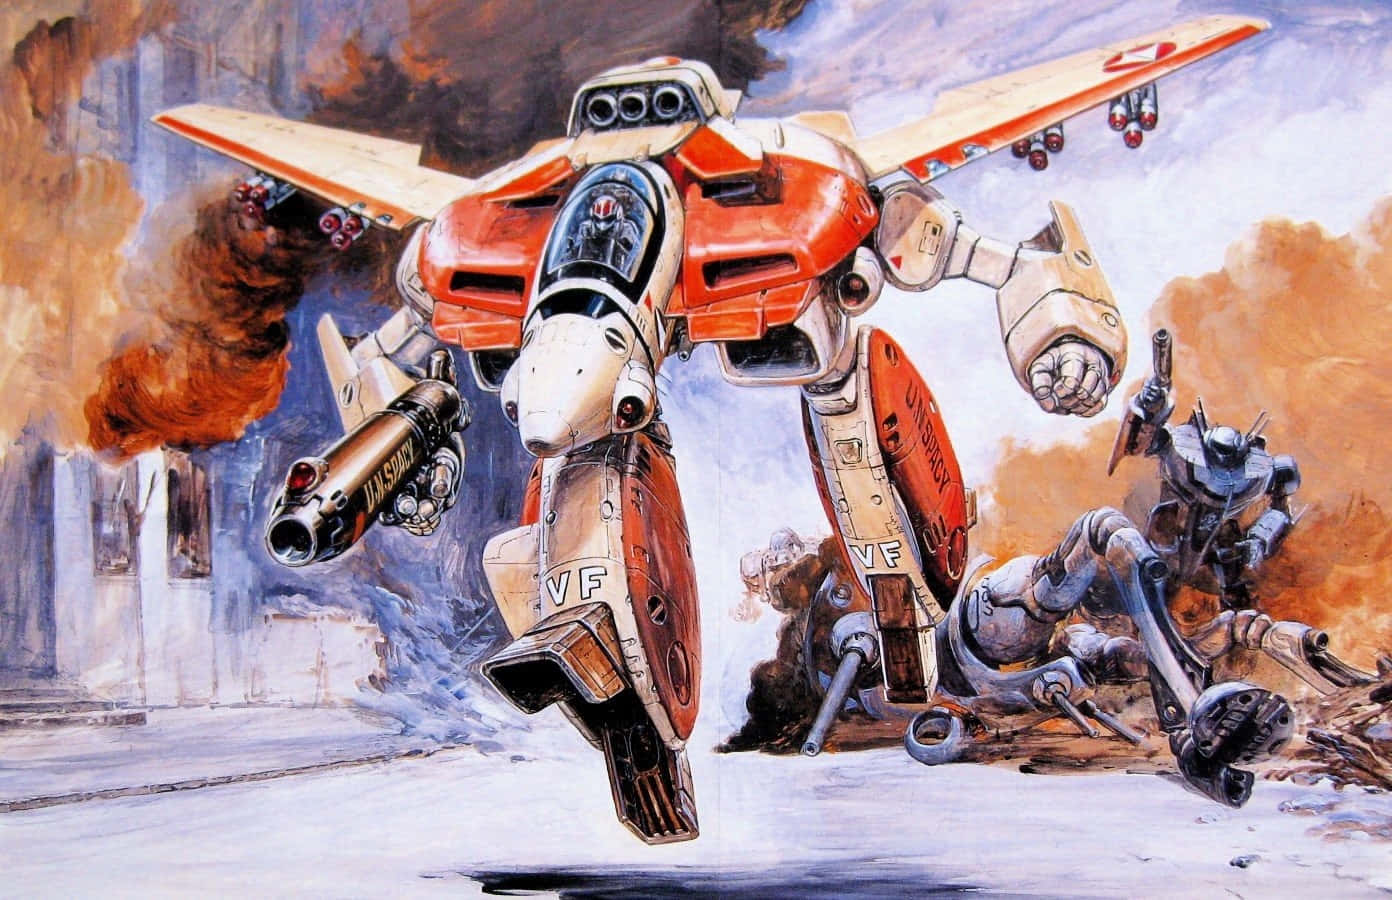 Robotech is an anime classic that's still popular today Wallpaper